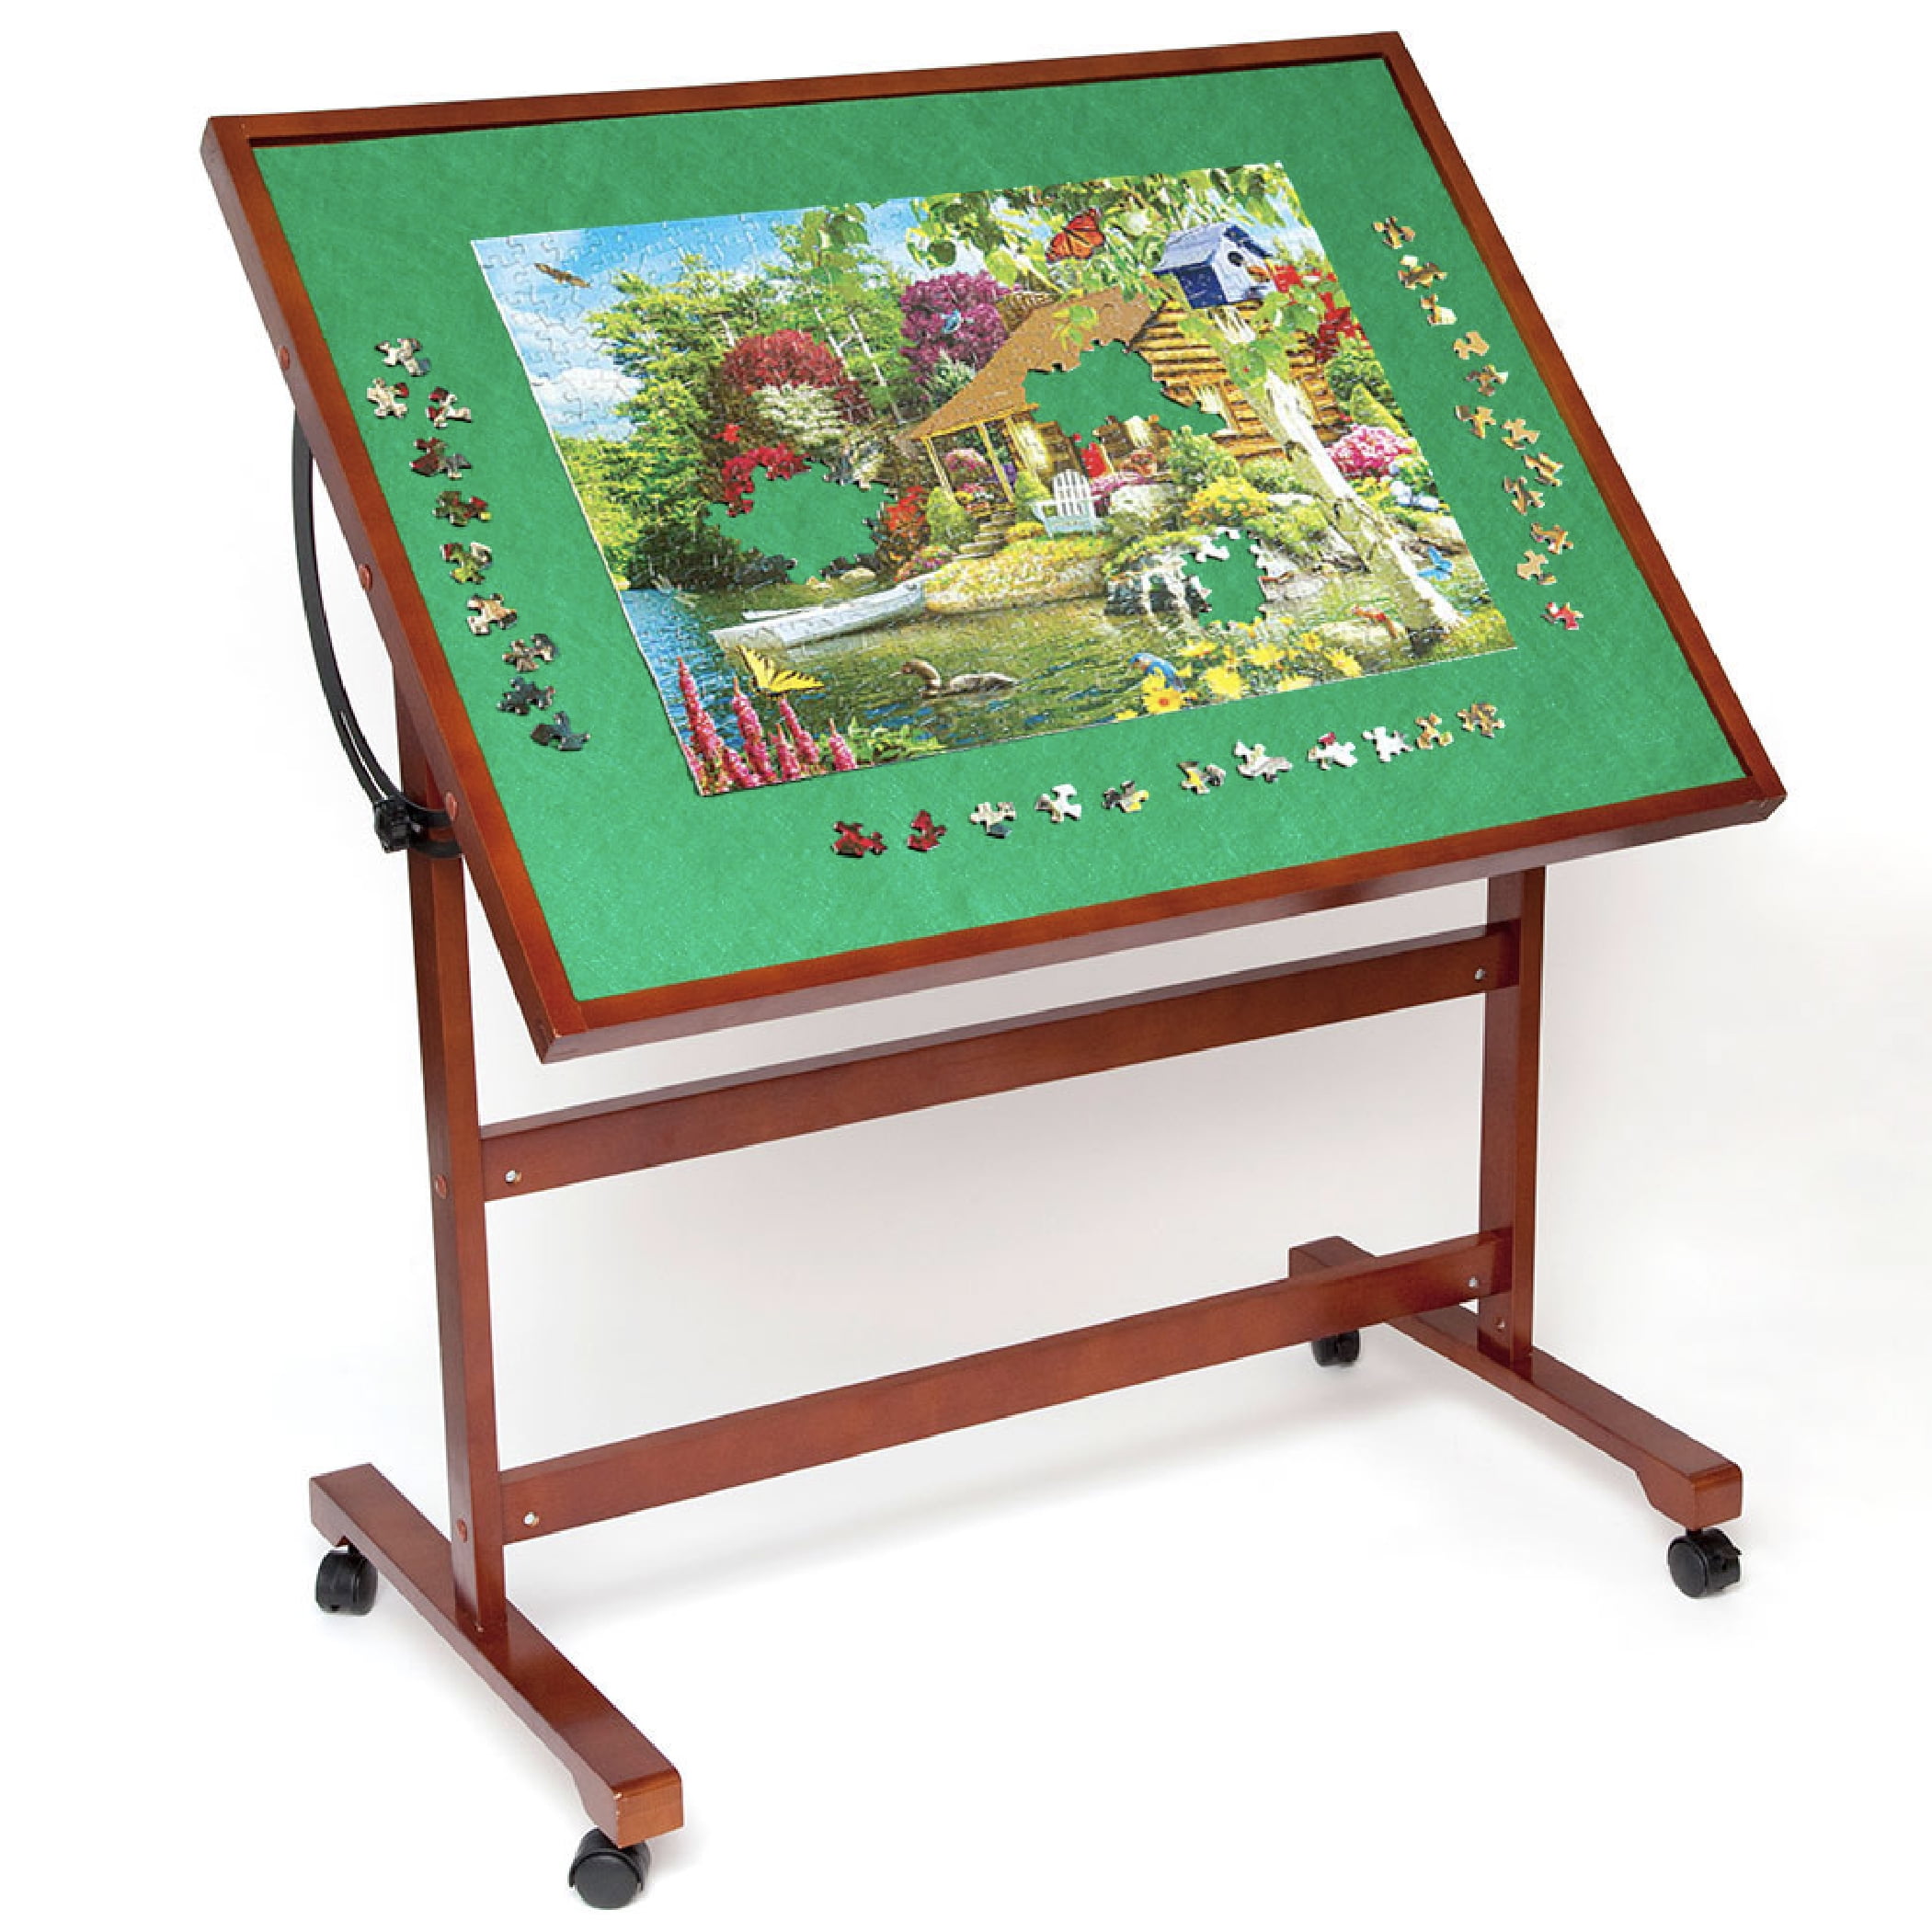 Bits and Pieces - Puzzle Expert Tabletop Easel - Non-Slip Felt Work Surface  Puzzle Table Accessory to Put Together Your Jigsaws